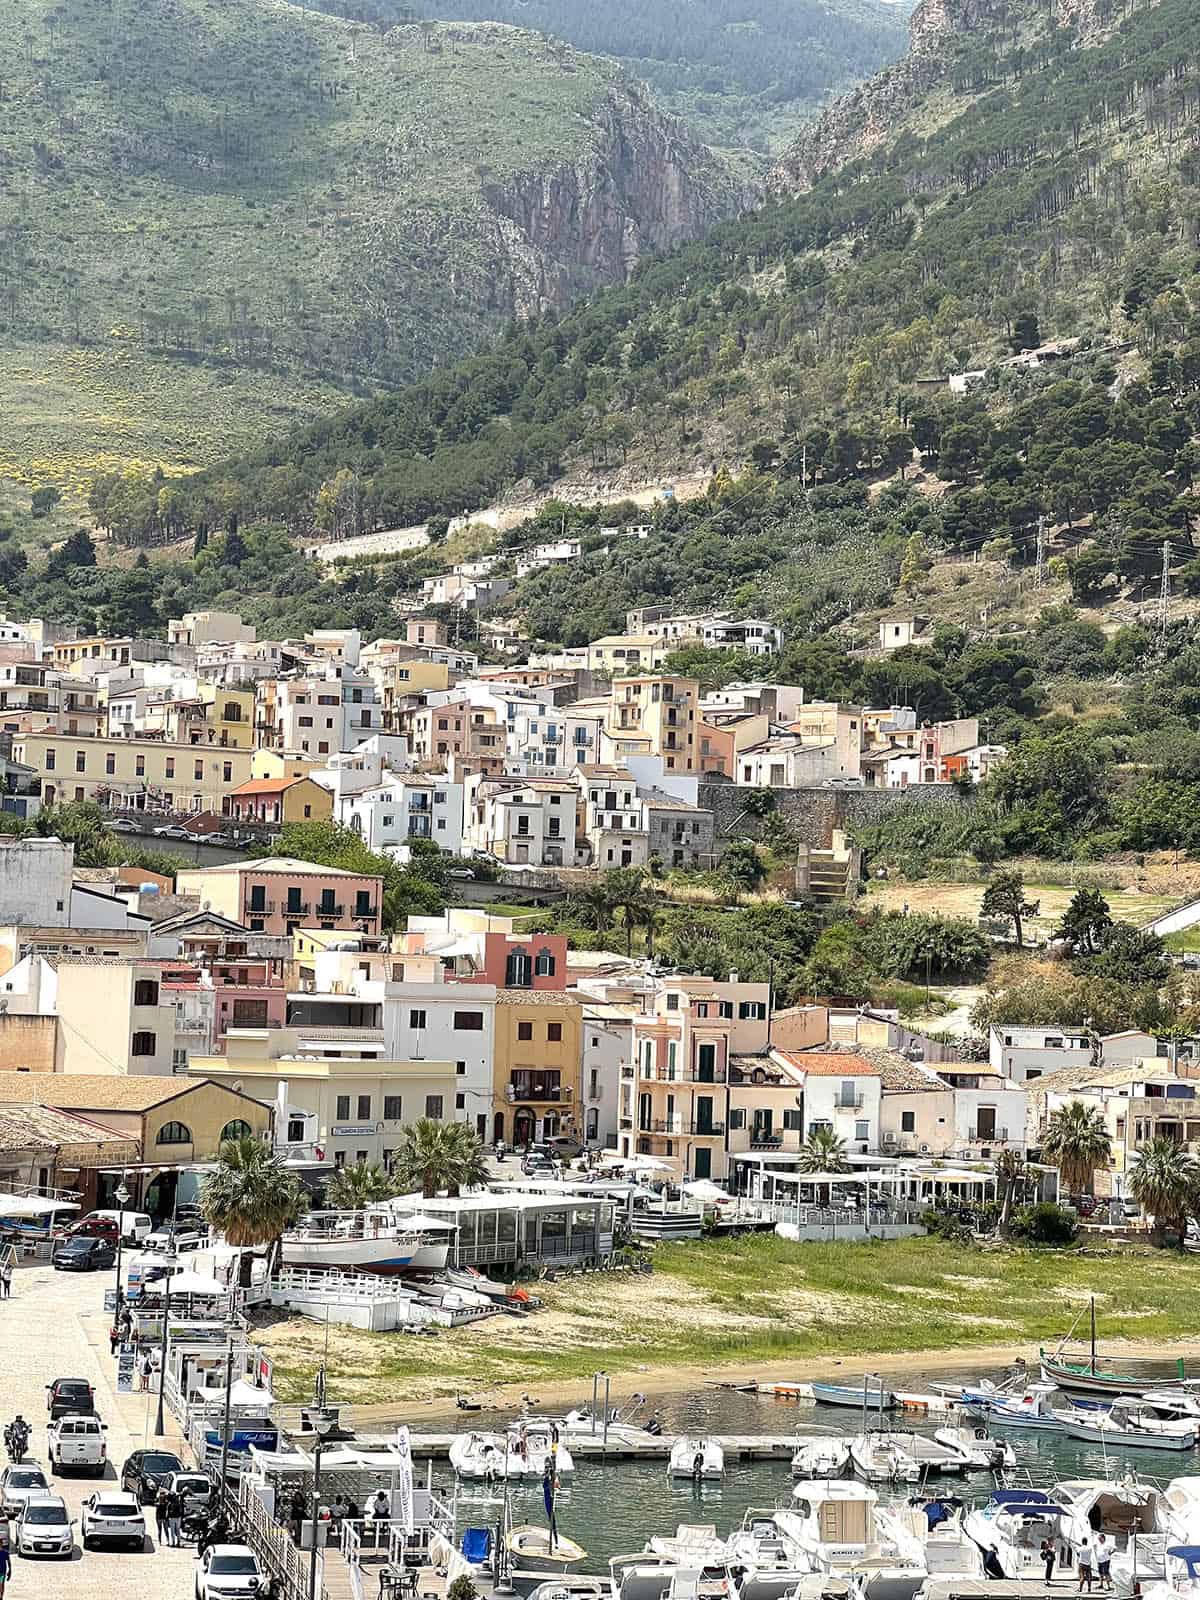 An image of the houses on the hill of Castellamare Del Golfo as viewed from the port